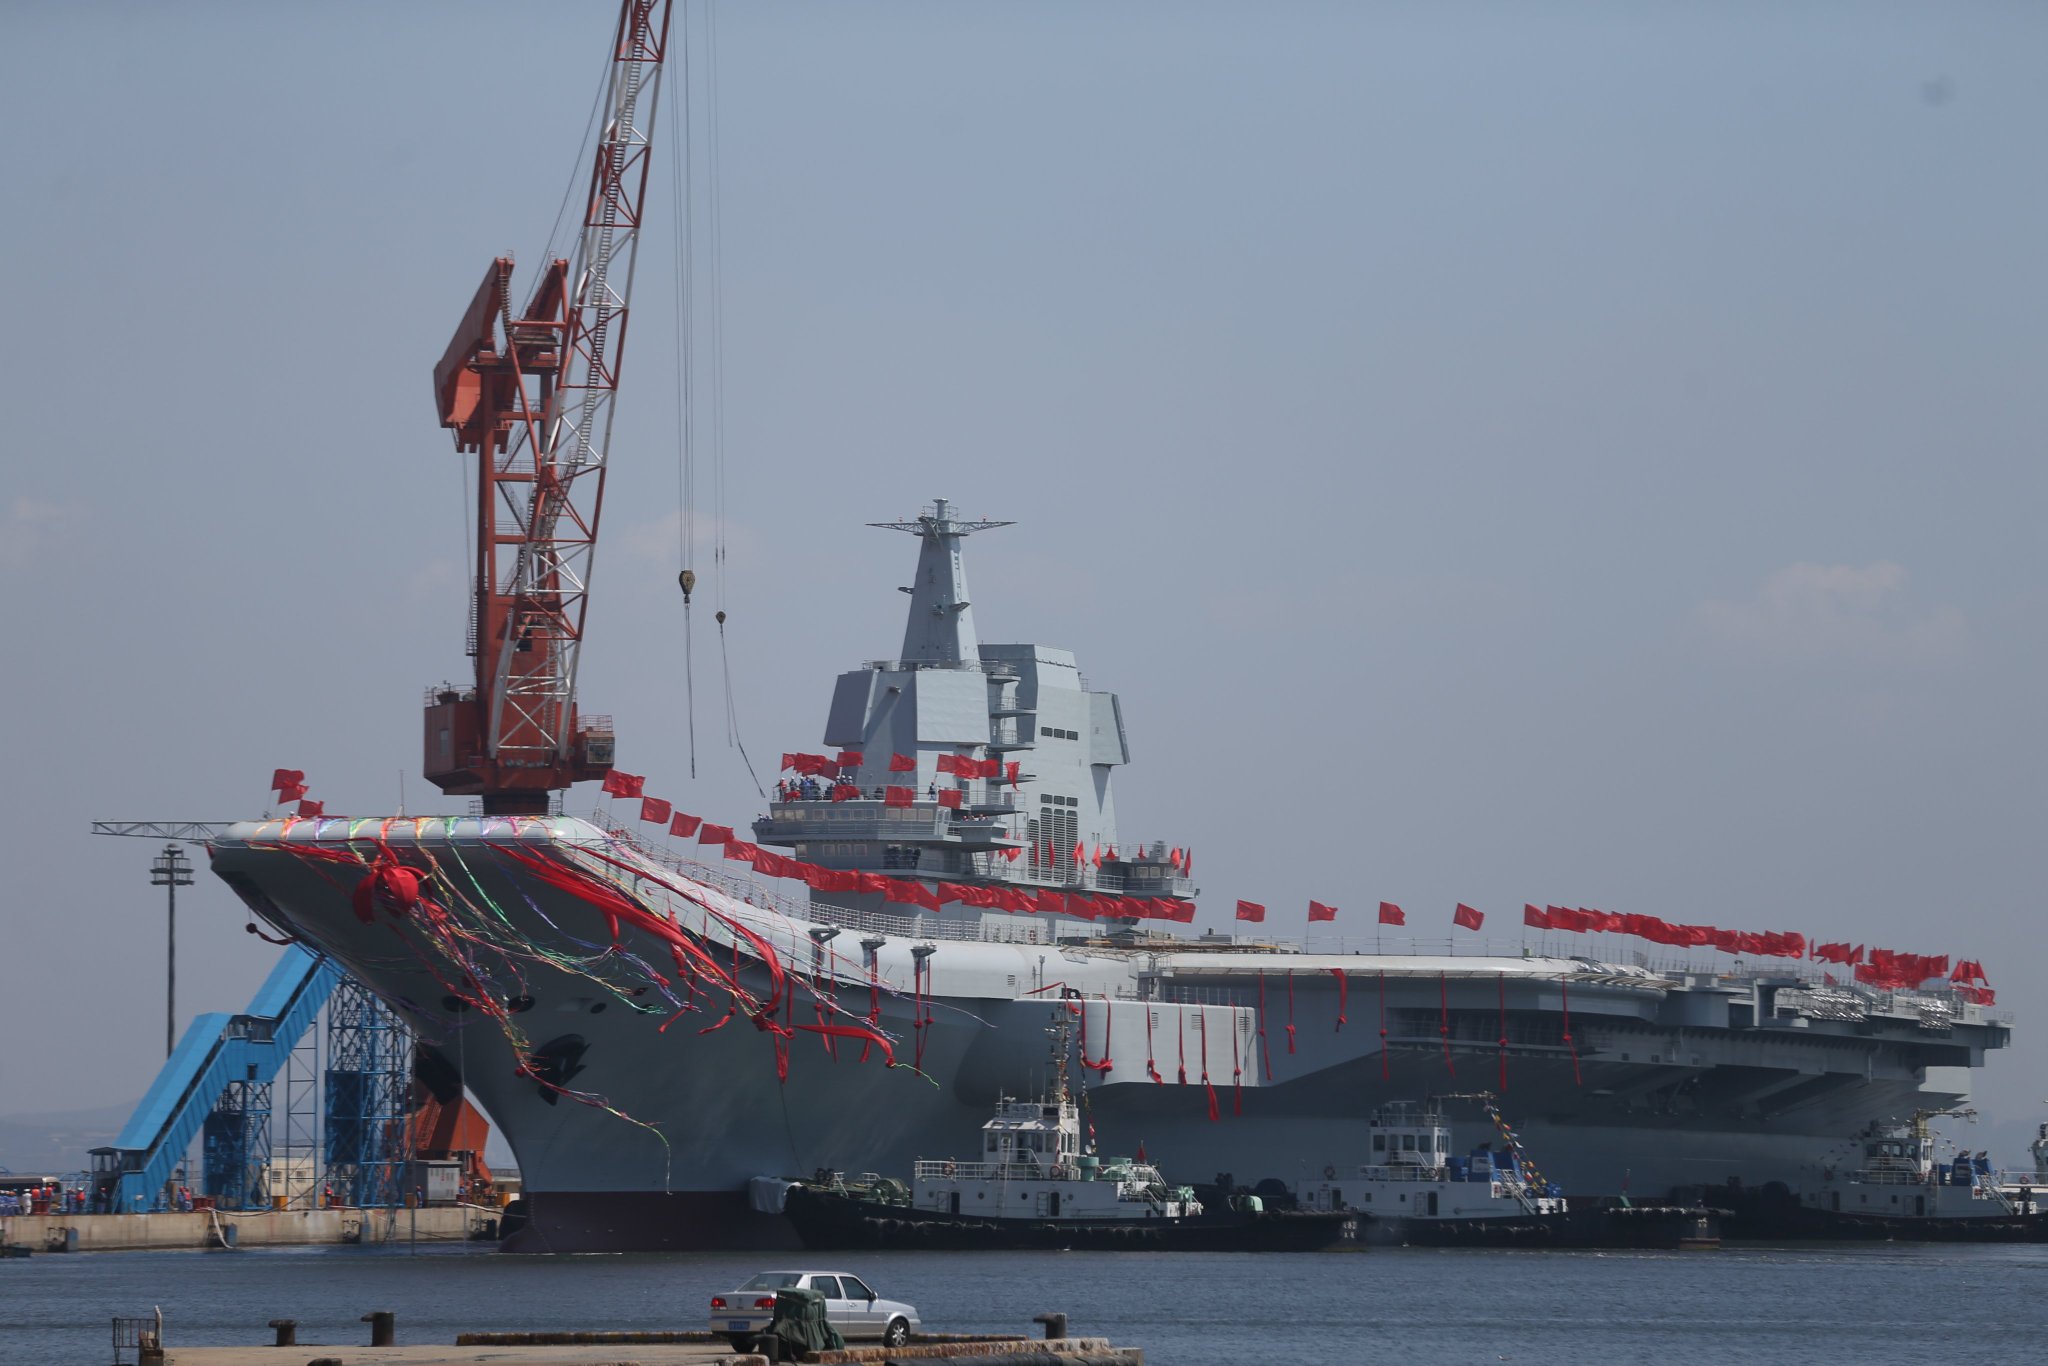 China’s Second Aircraft Carrier Enters Service